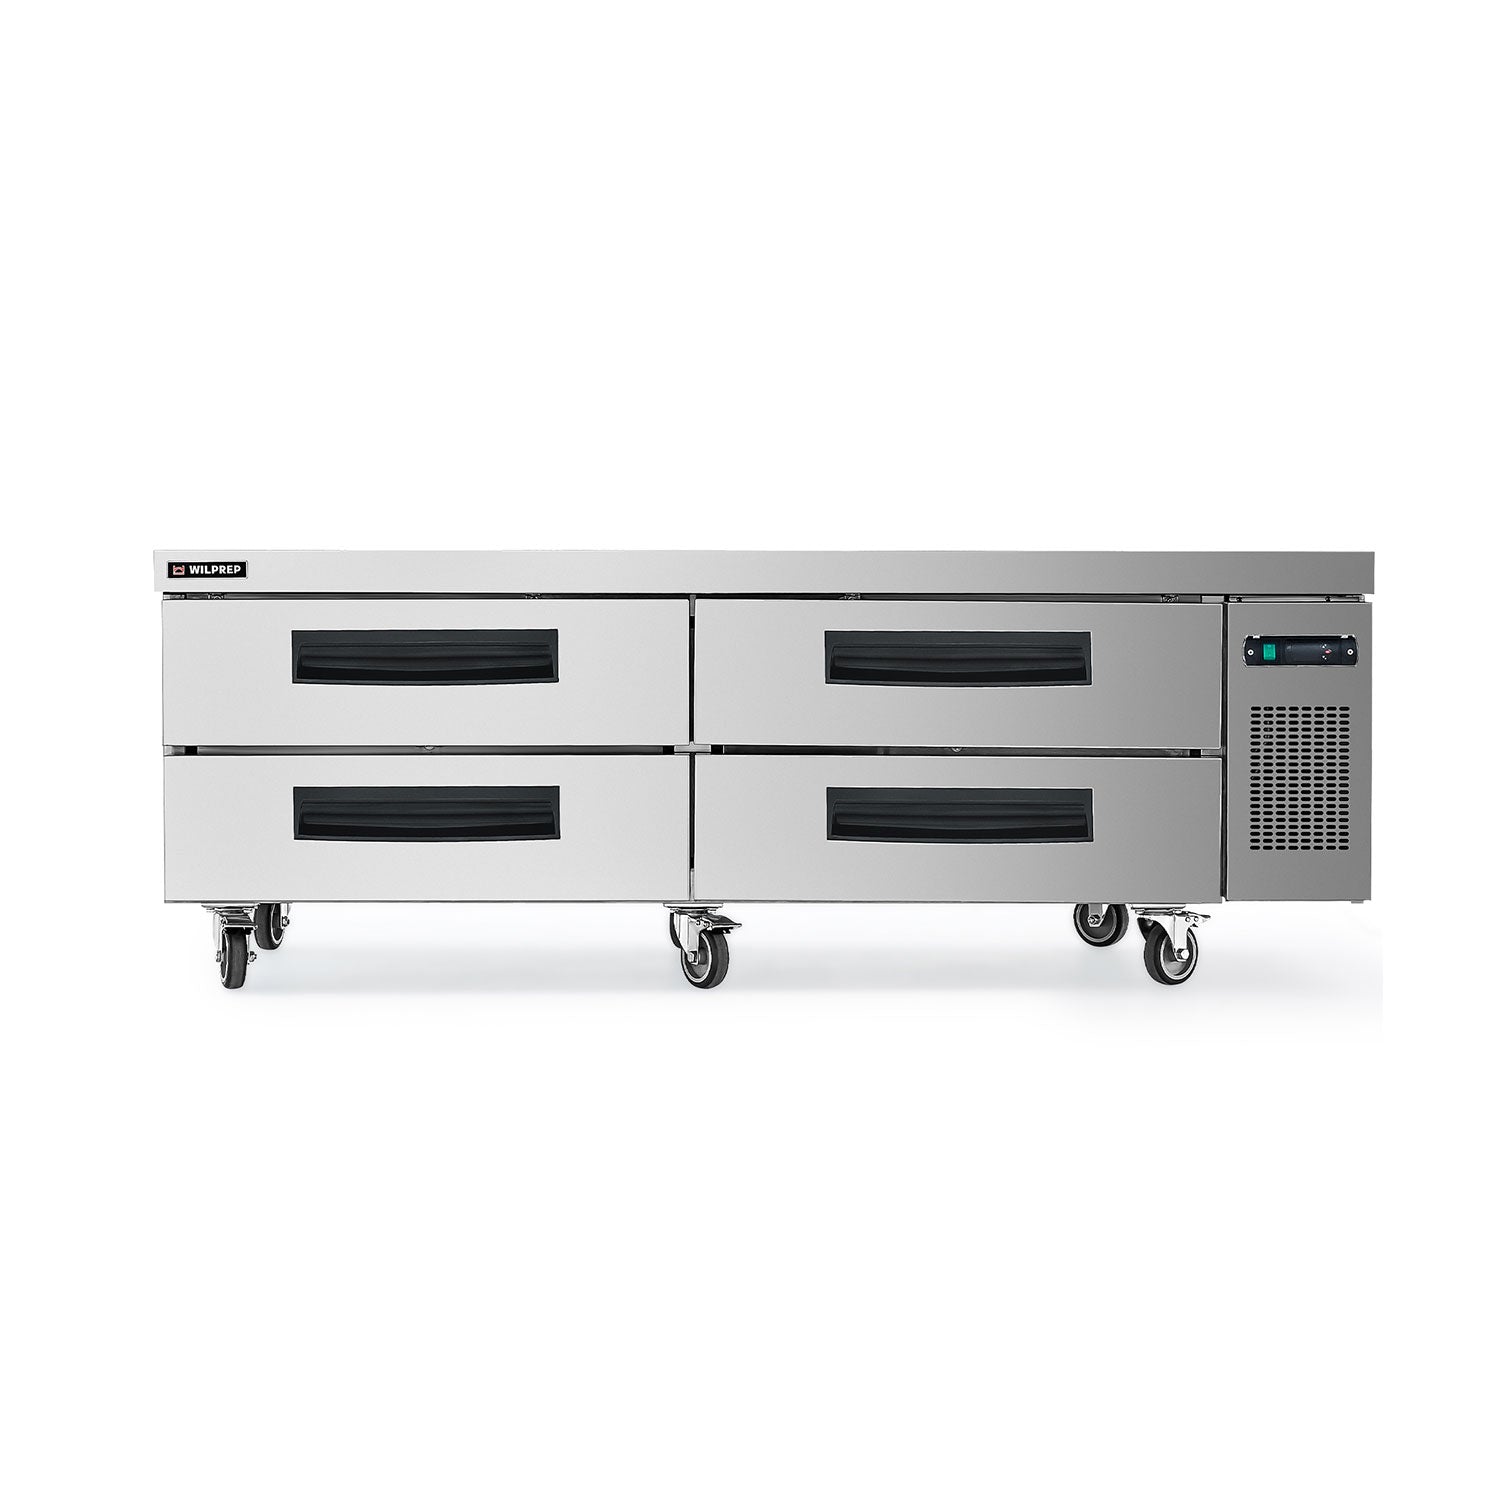 72" Commercial Chef Base Refrigerator